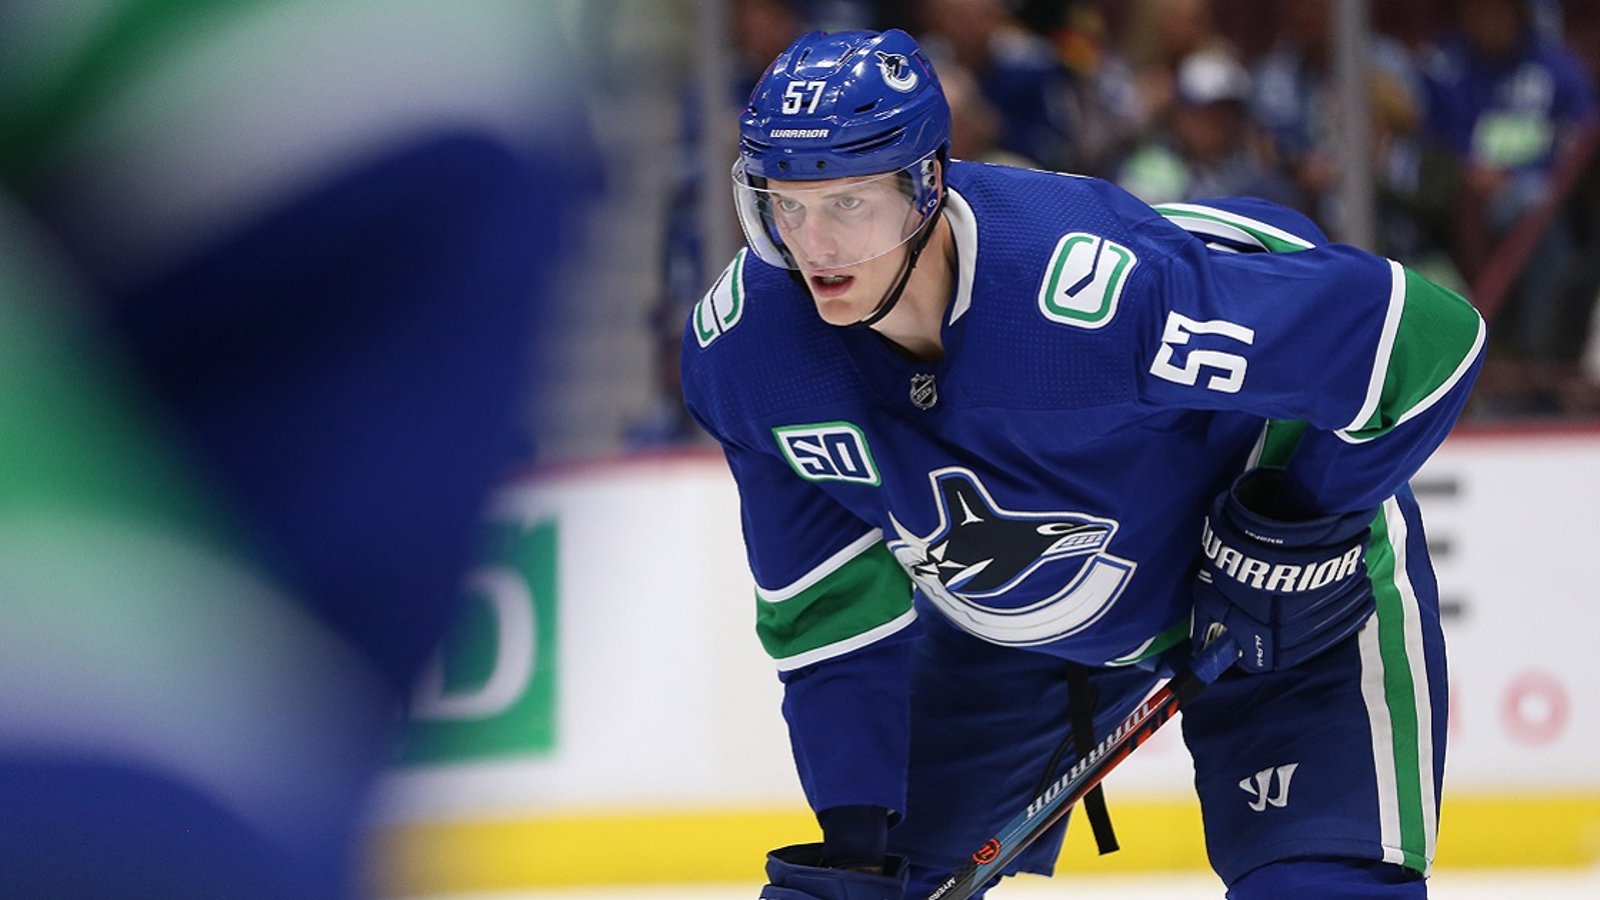 Concern for Canucks ahead of Game 6 as player leaves warmups.